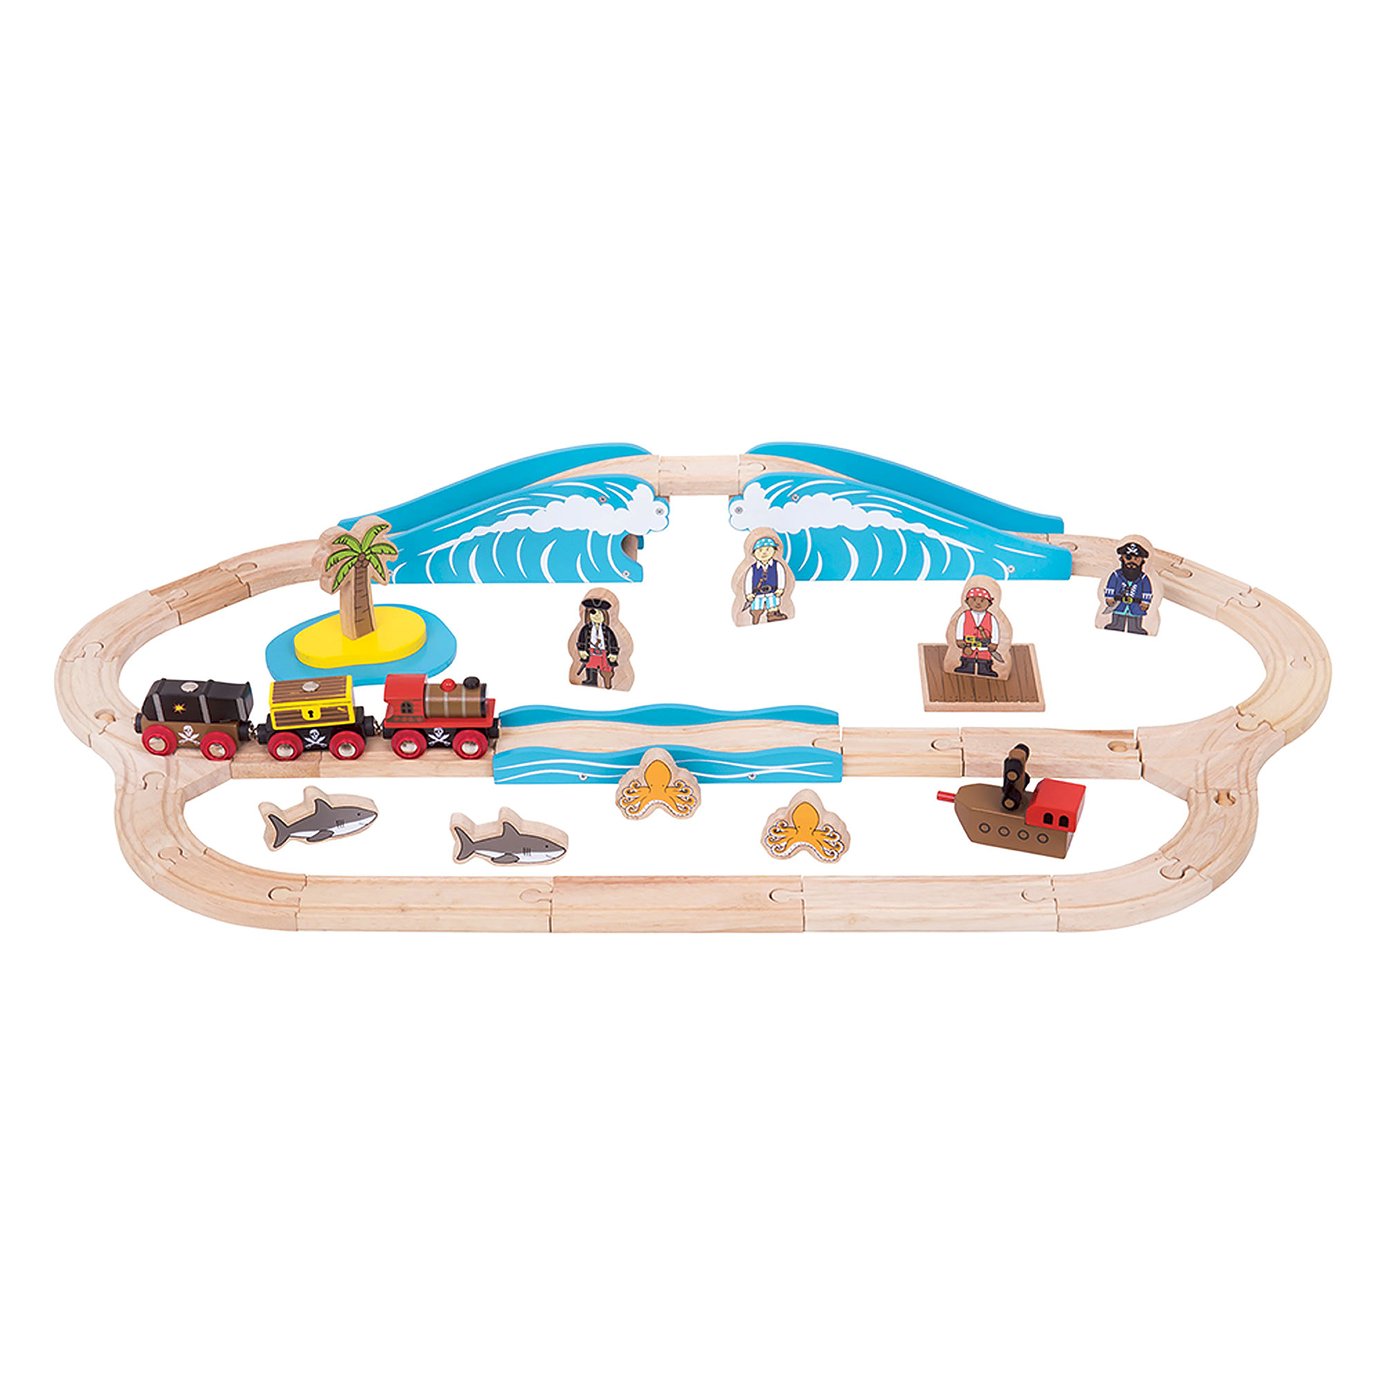 BigJigs Wooden Pirate Train Set Review